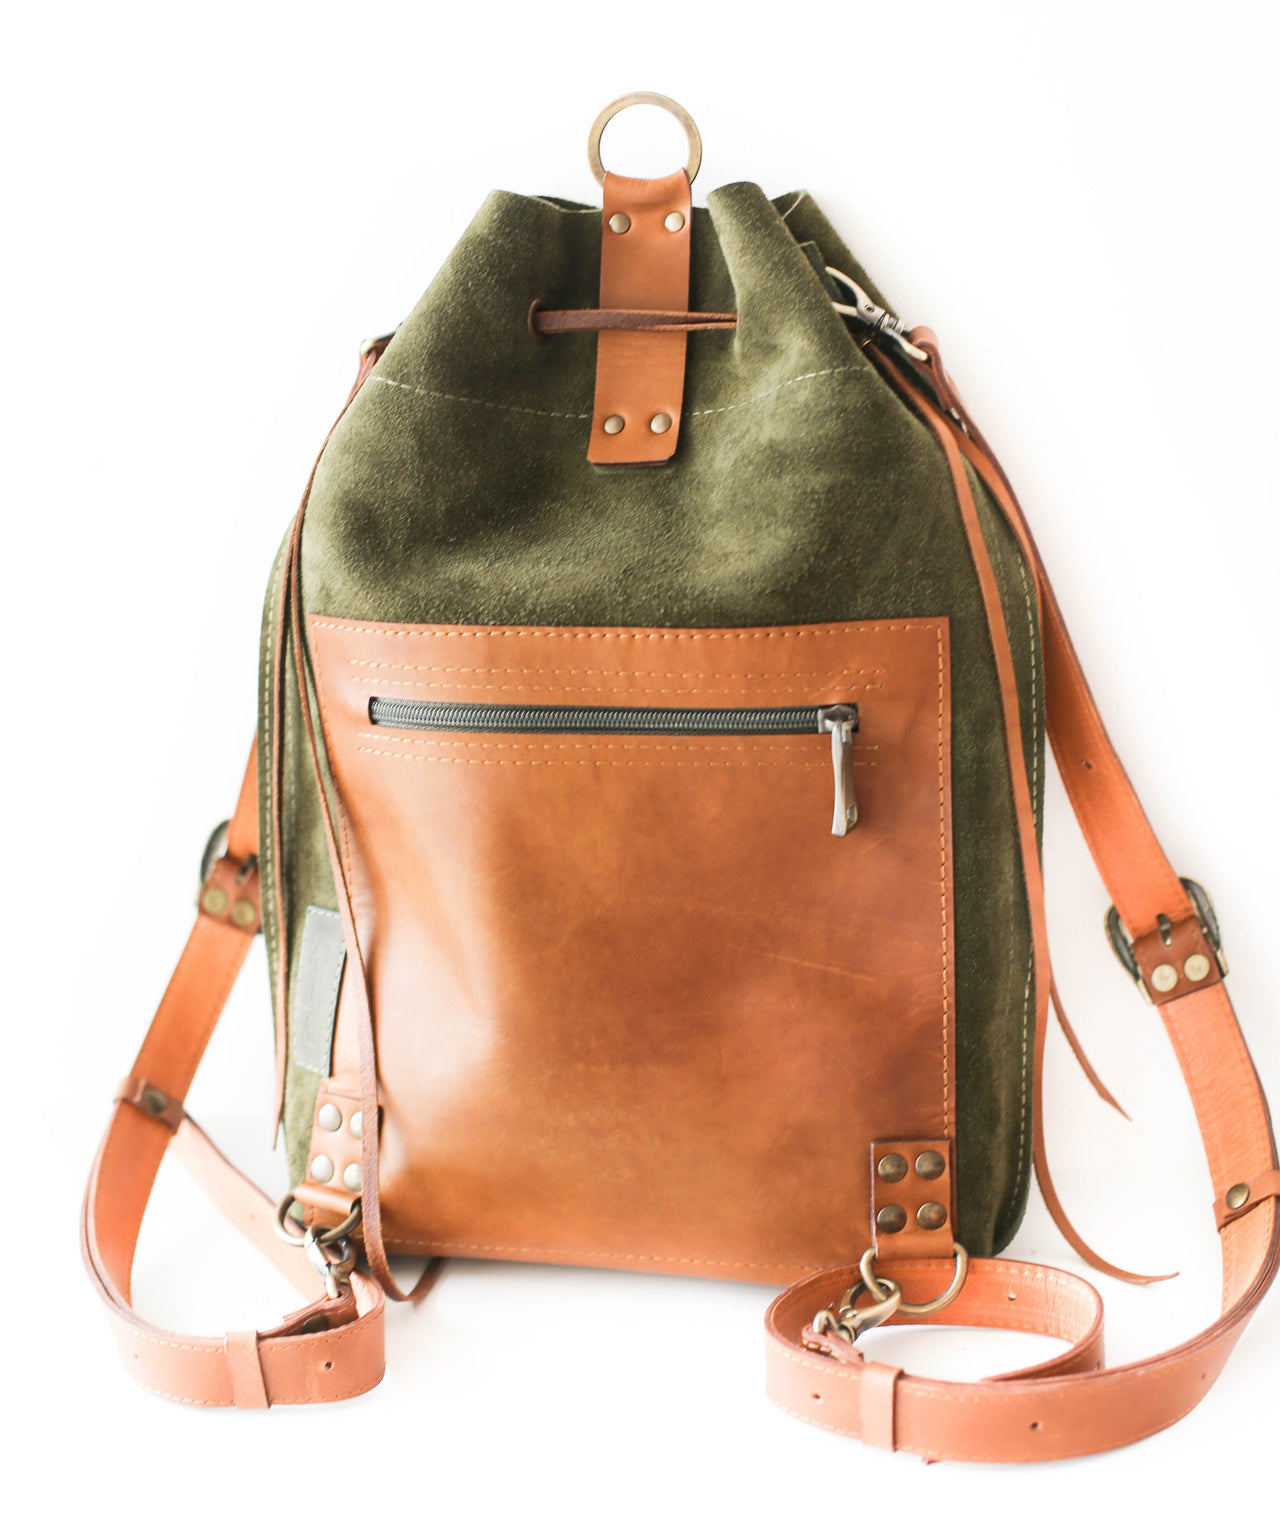 Convertible leather backpack purse for women